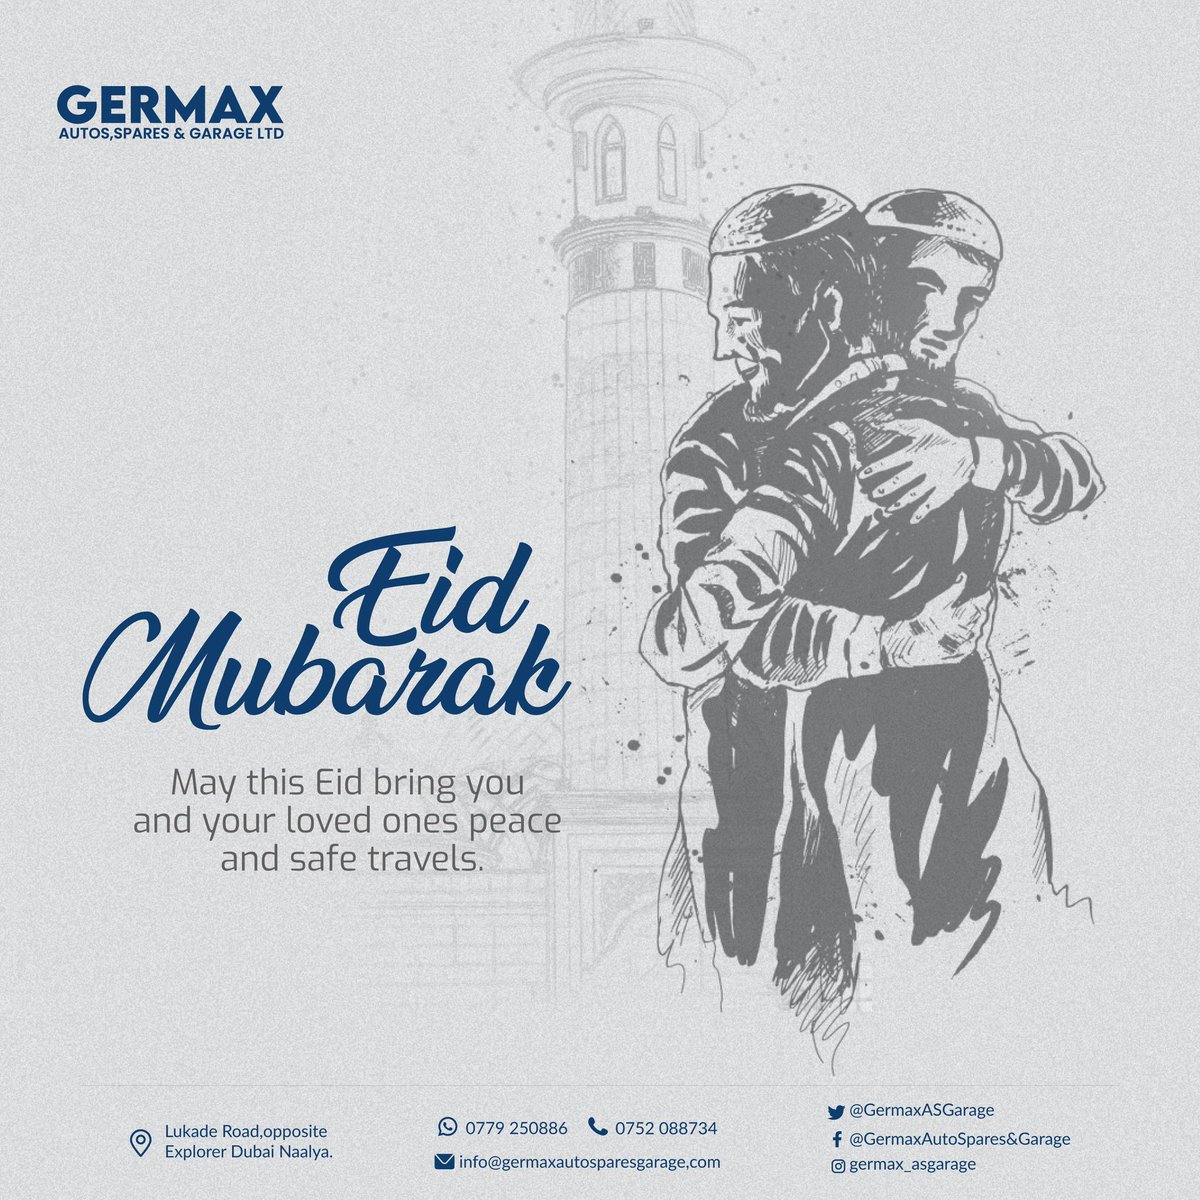 Ramadan is the gentle rain that nourishes the soul, while Eid is the rainbow that colours our world with hope, love and blessings. Hope you have the best of both. Eid Mubarak! #EidMubarak #MotorForLess